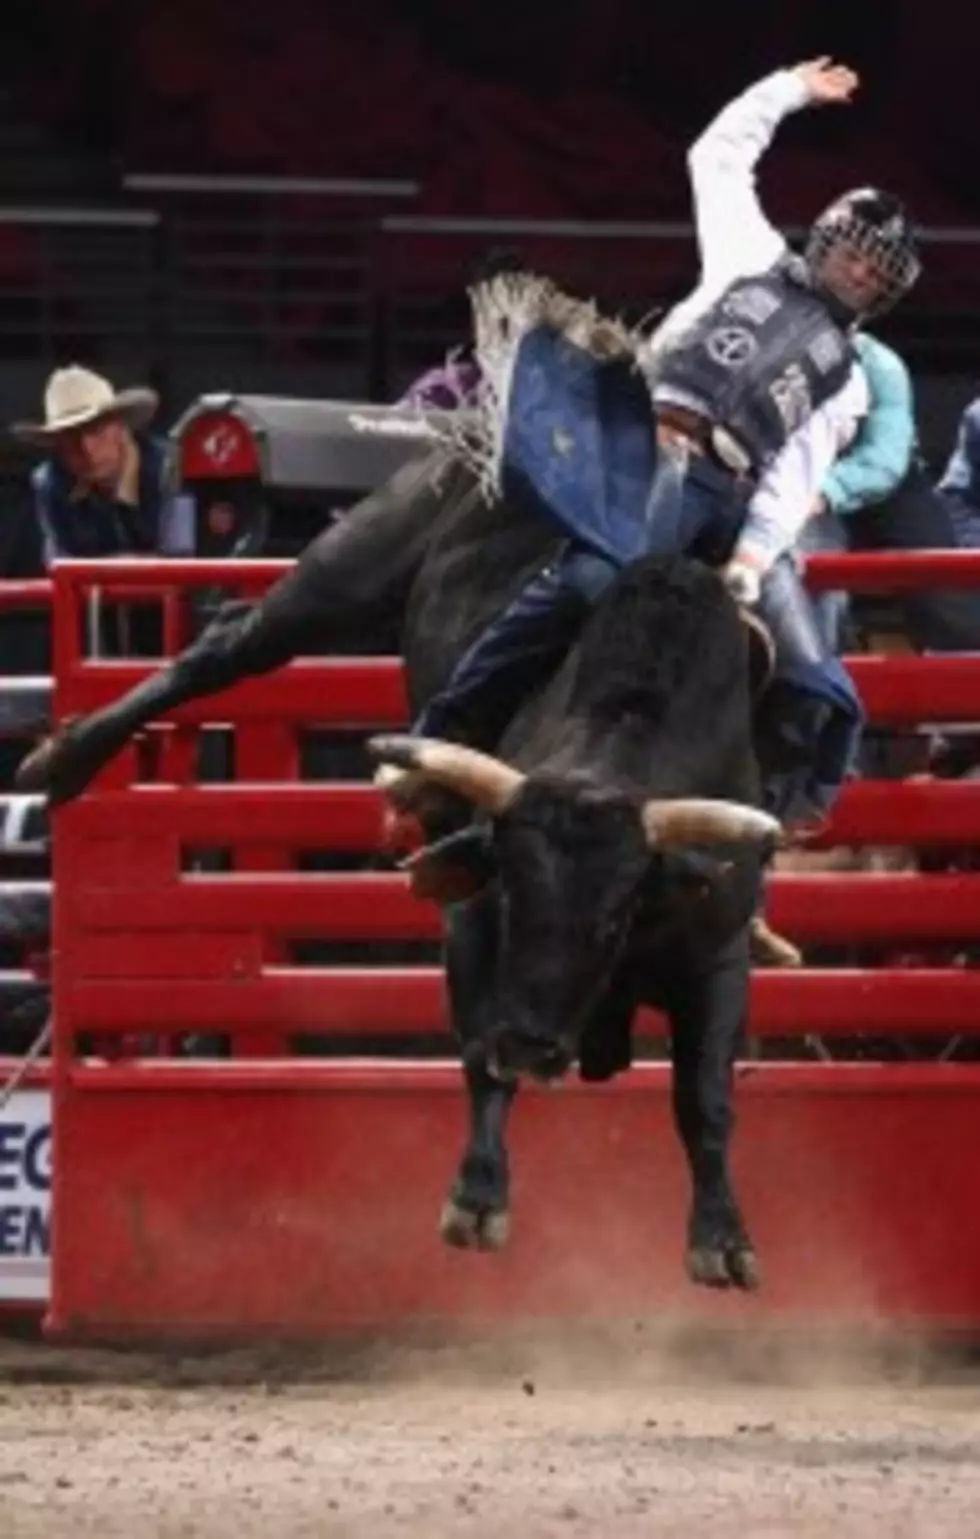 62nd Annual Texas Tech National Rodeo Begins This Week